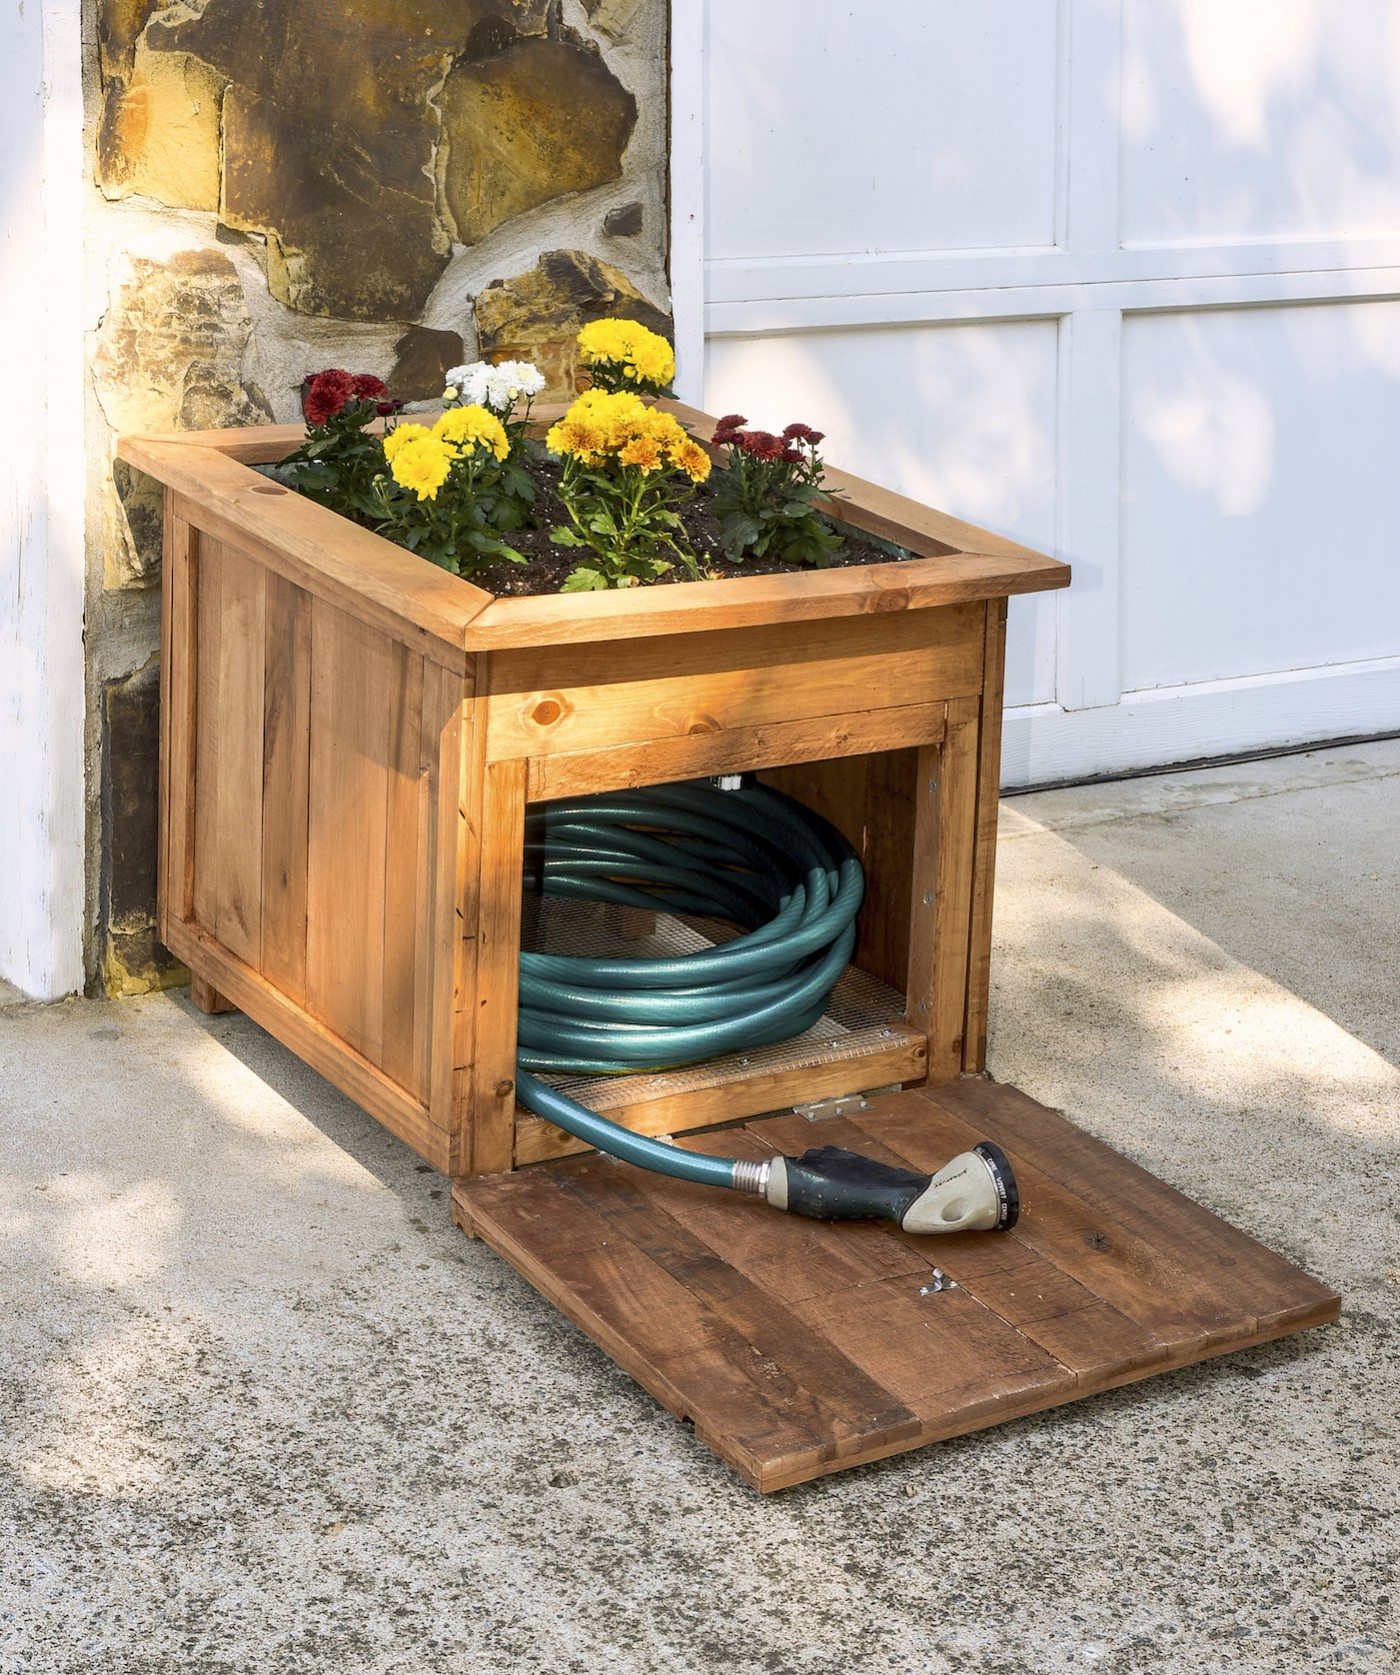 DIY Wooden Planter Box
 20 DIY Wooden Planter Boxes for Your Yard or Patio